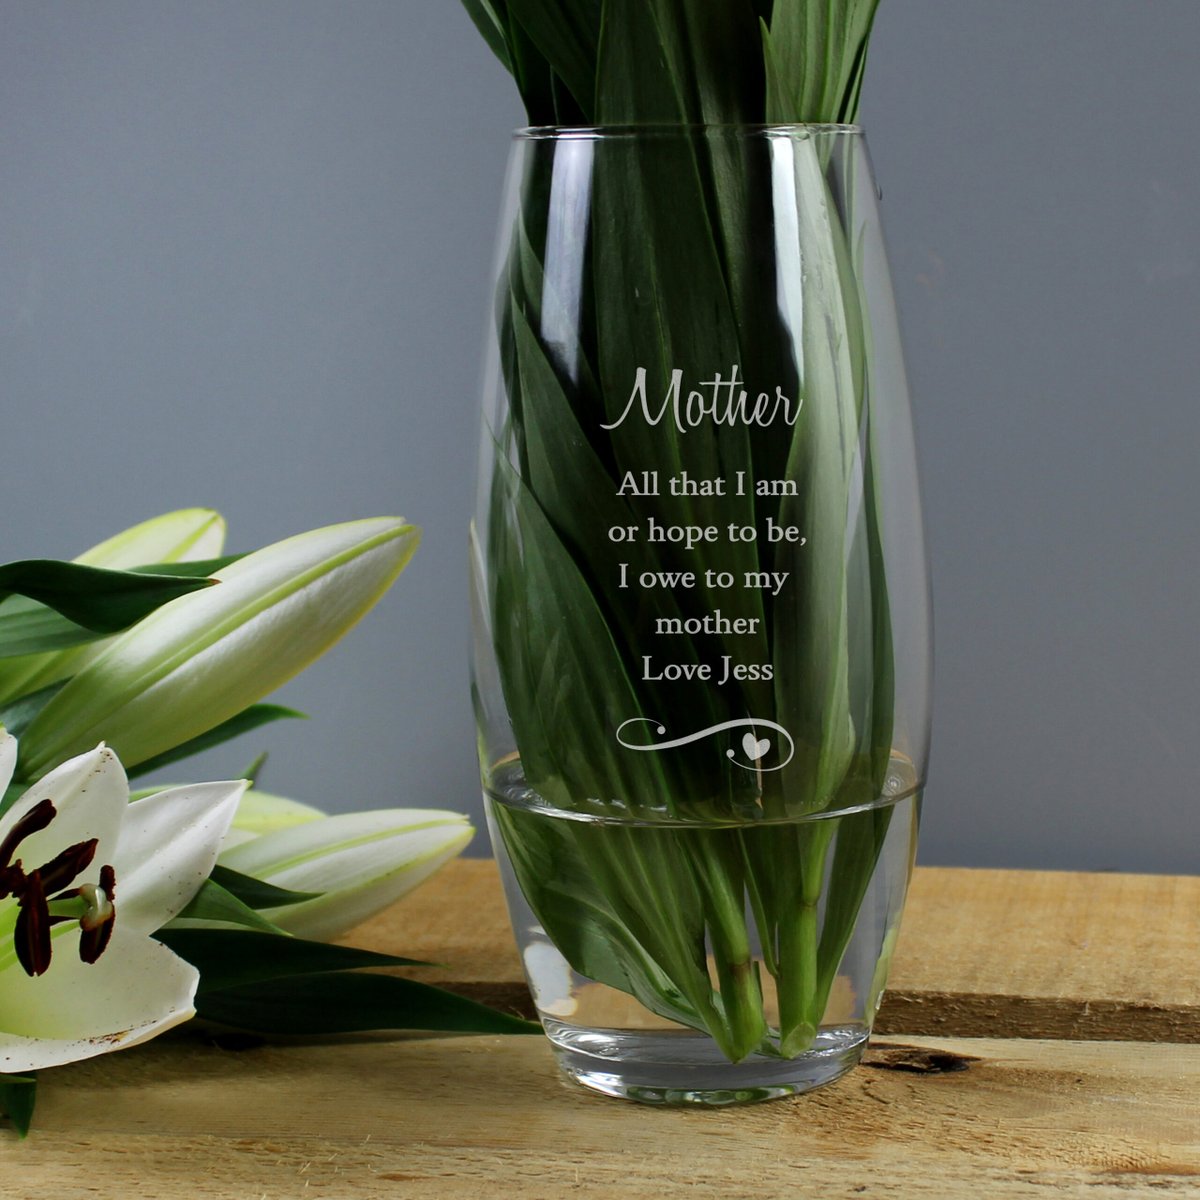 Have you entered our Mother’s Day giveaway yet?

One lucky winner will take home a bespoke personalised Vase, a treasure to cherish forever.

To enter:

💫 Follow our page
💫 Like & RT this post!

#giveaway #mothersdaygiveaway #mothersday